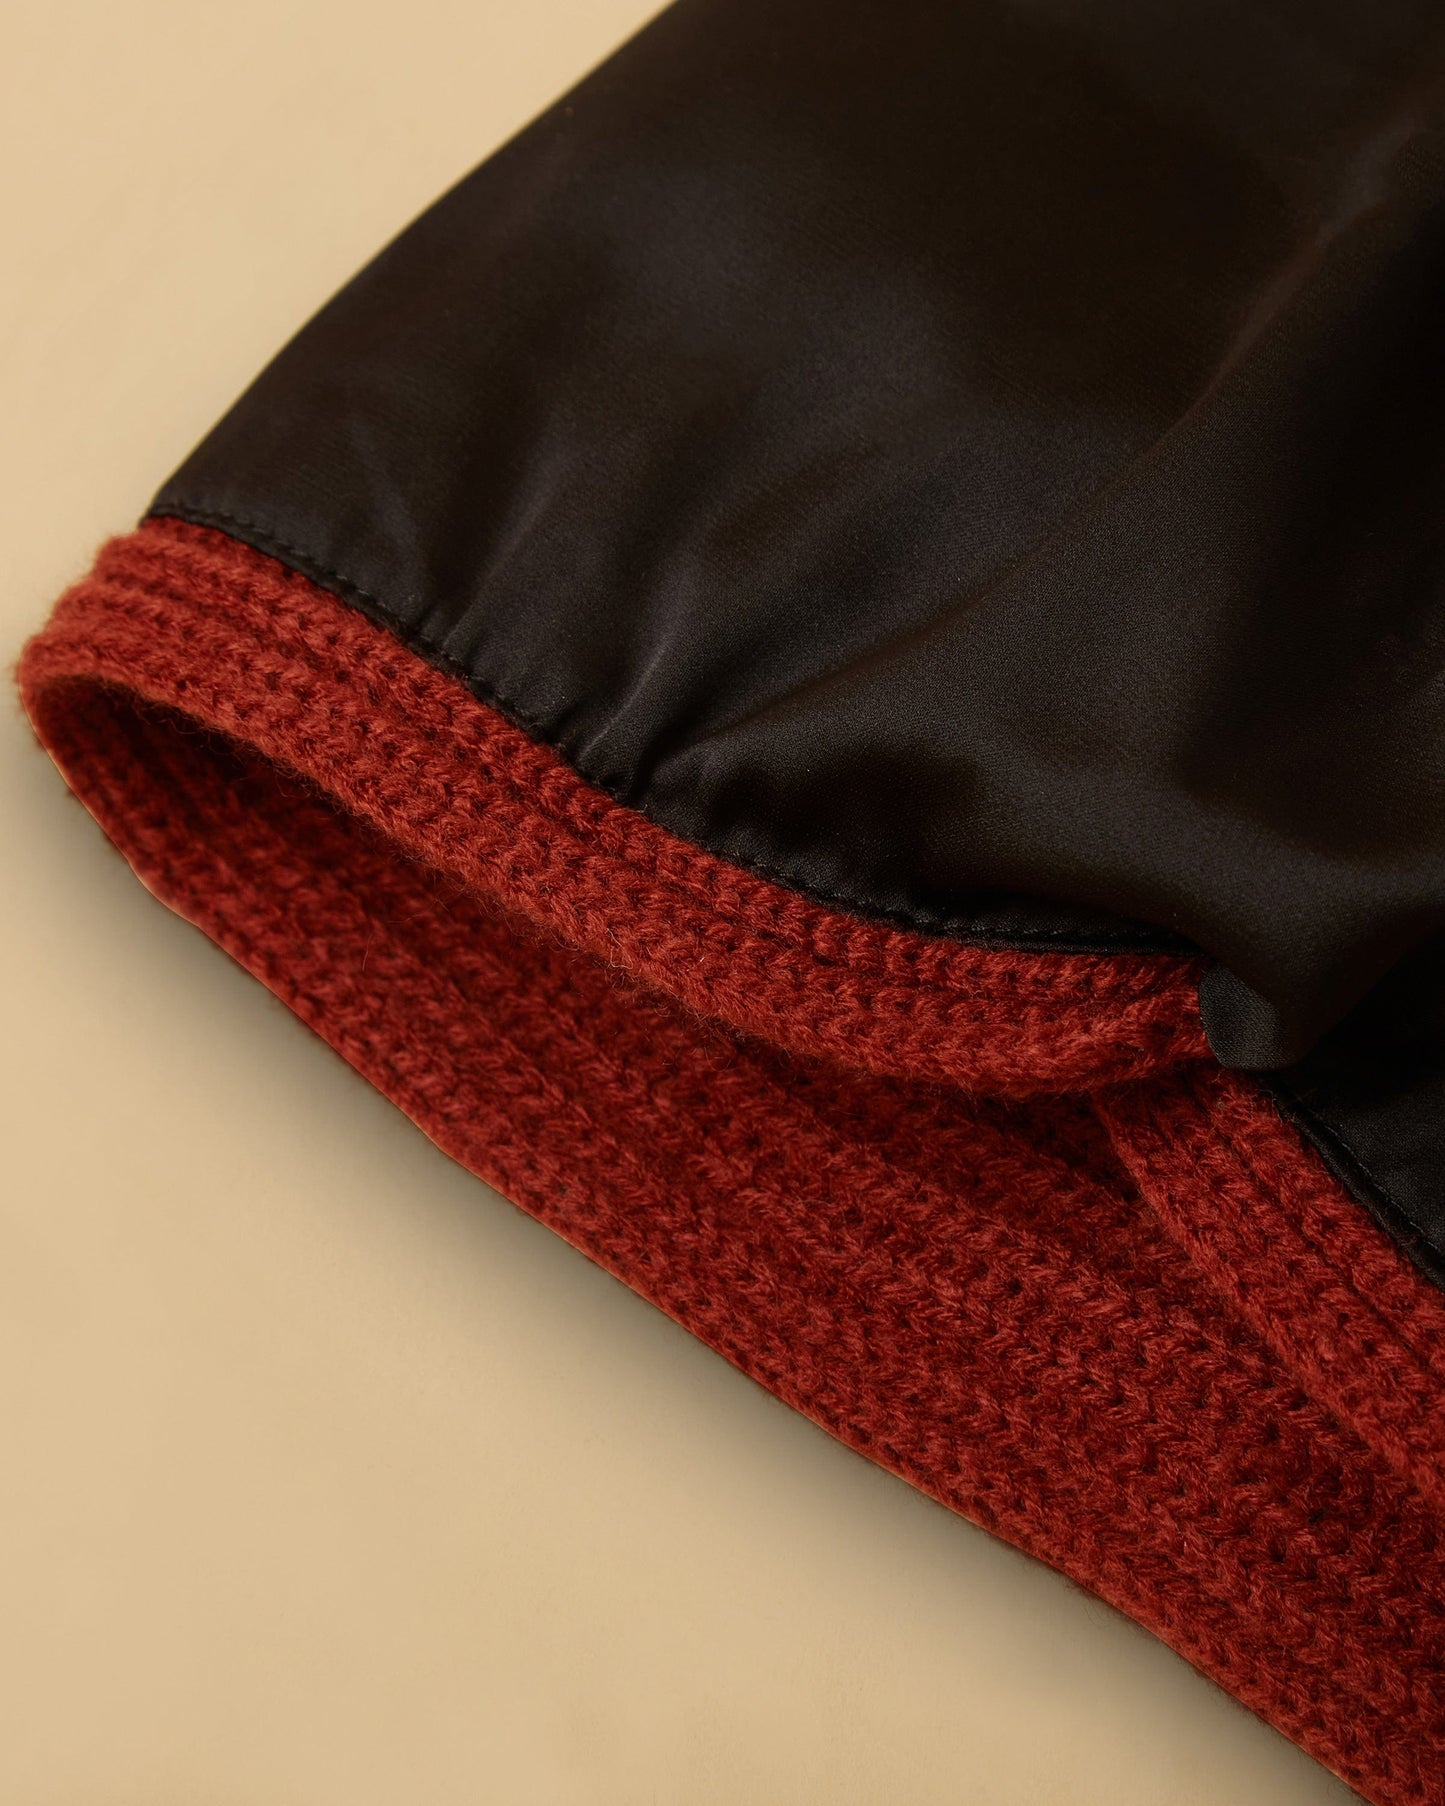 The Wrap Life Satin Lined Winter Turban in Sienna Red Turban